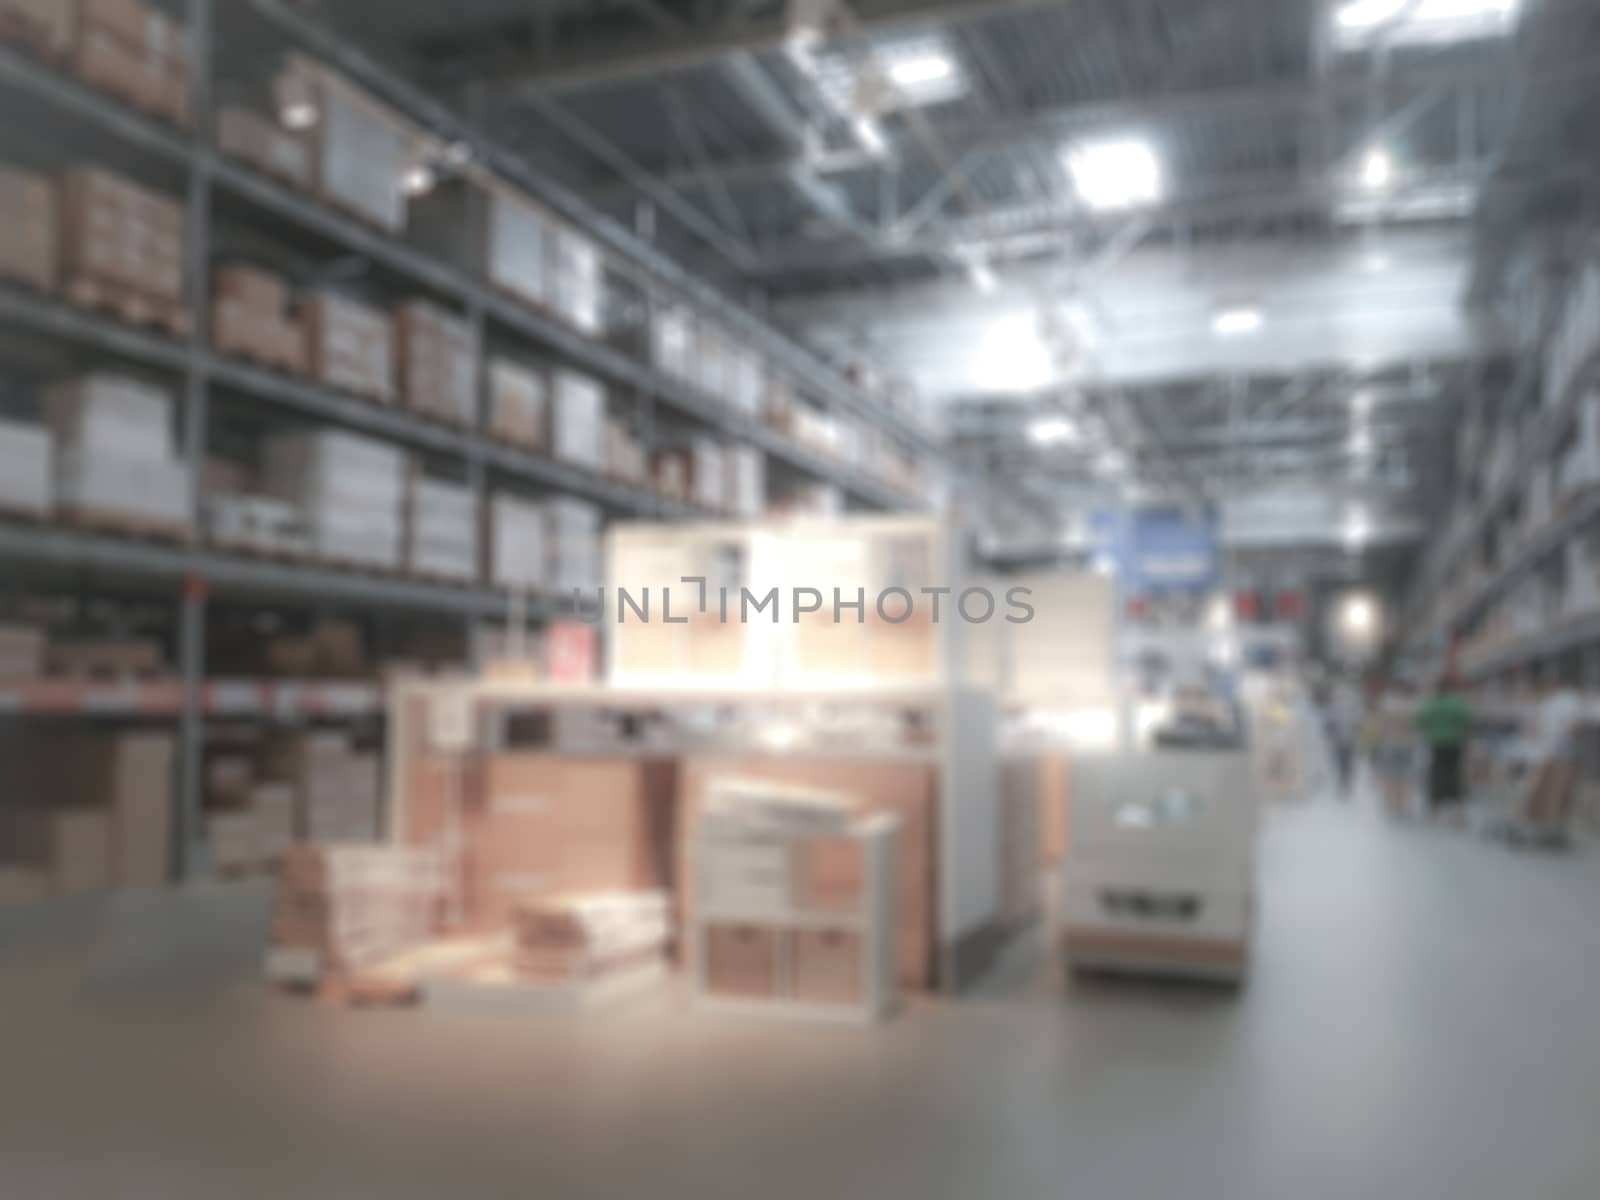 Industrial background - blurred interior view of a large warehouse or logistic corporation with workers